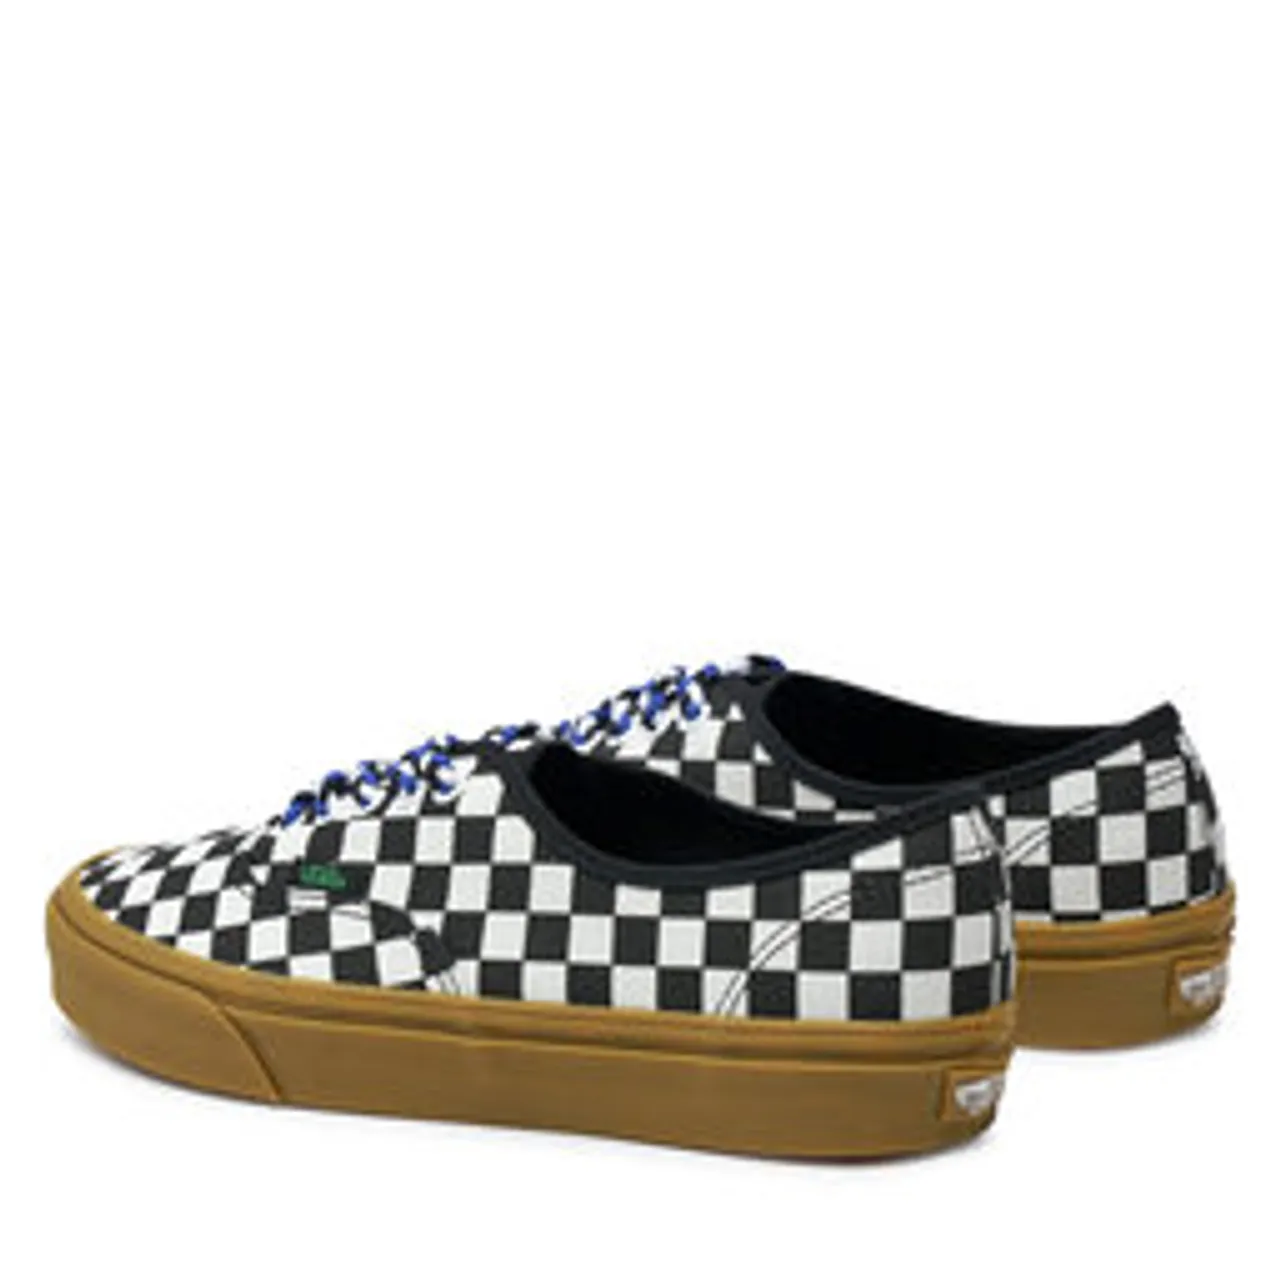 Sneakers aus Stoff Vans Authentic VN0009PVBZW1 Checkerboard Black/White